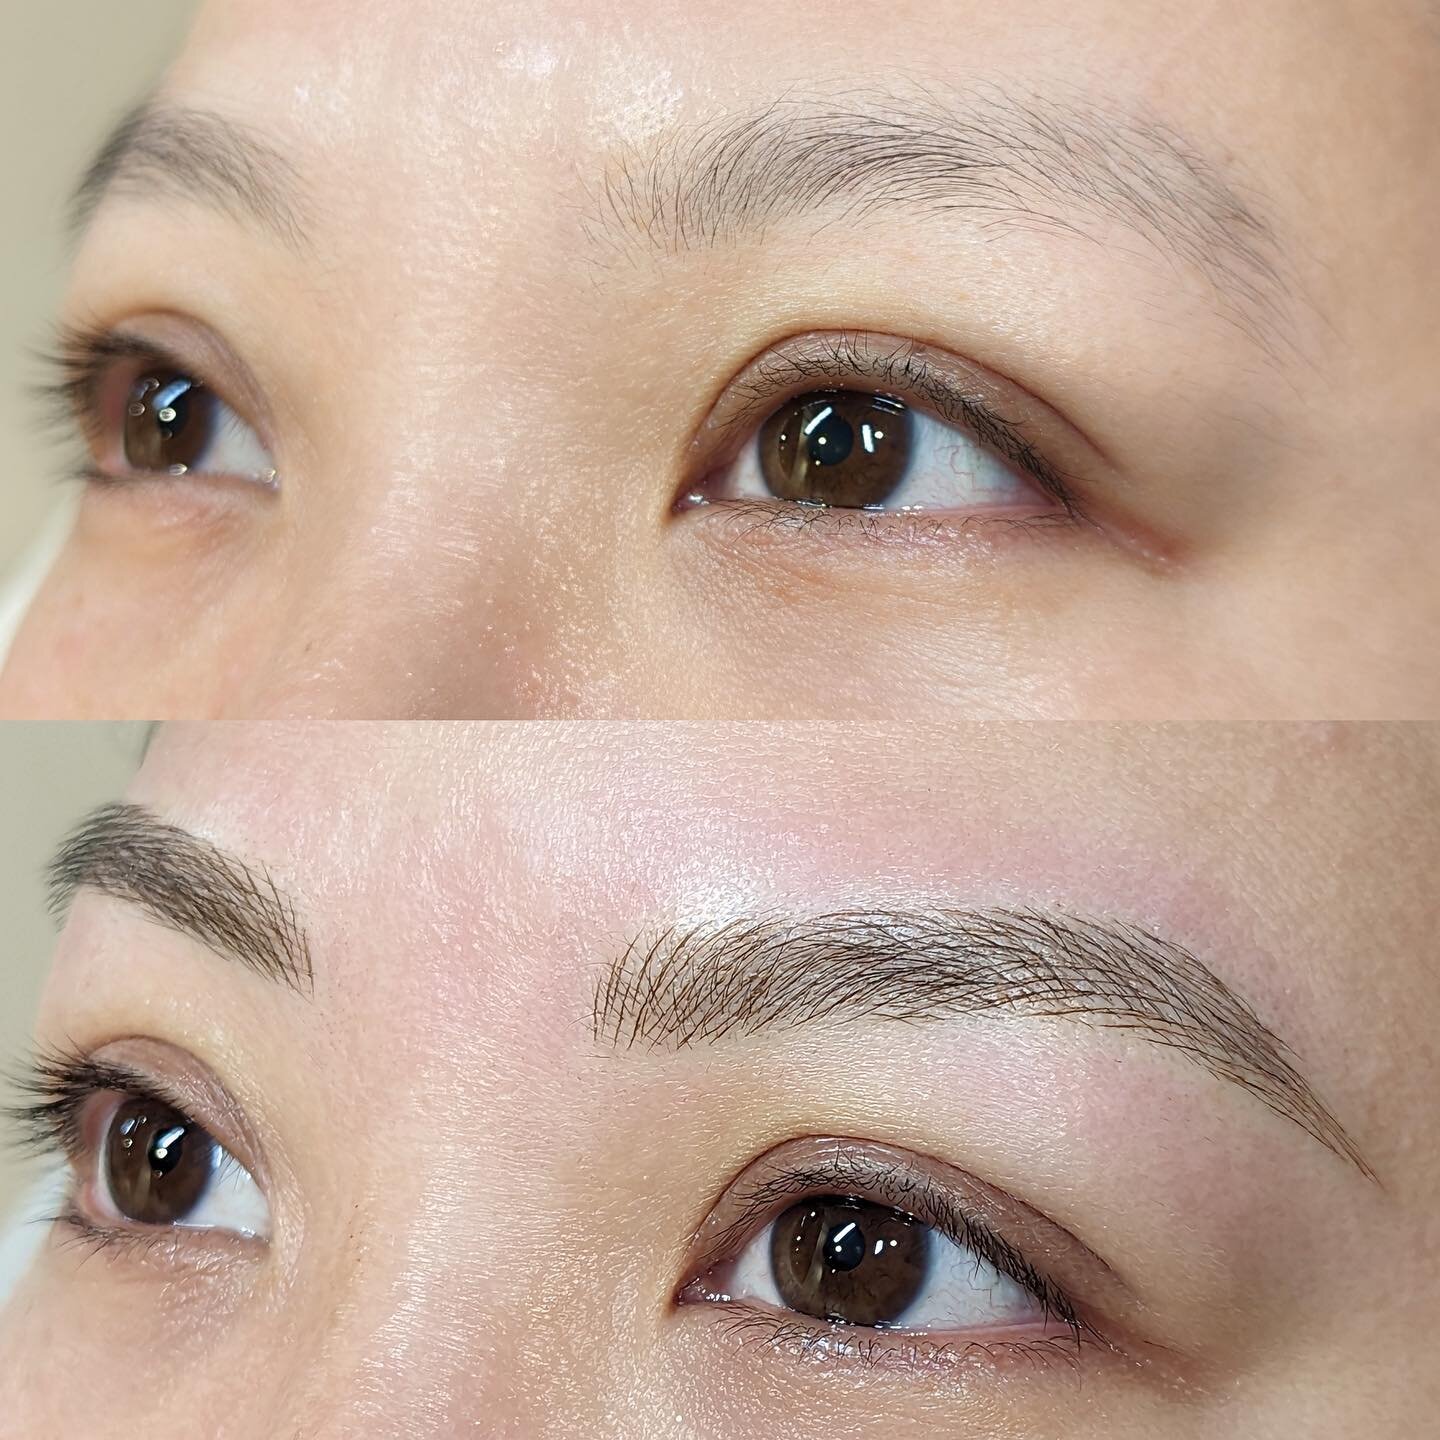 Before and right after microblading. 

Double tap if you love this transformation as much as I do! 😍

For cosmetic tattoo enquiries please email info@browartistrybyval.com
.
.
. 
.
.
#microblading #microbladingeyebrows #browgoals #microbladingartist